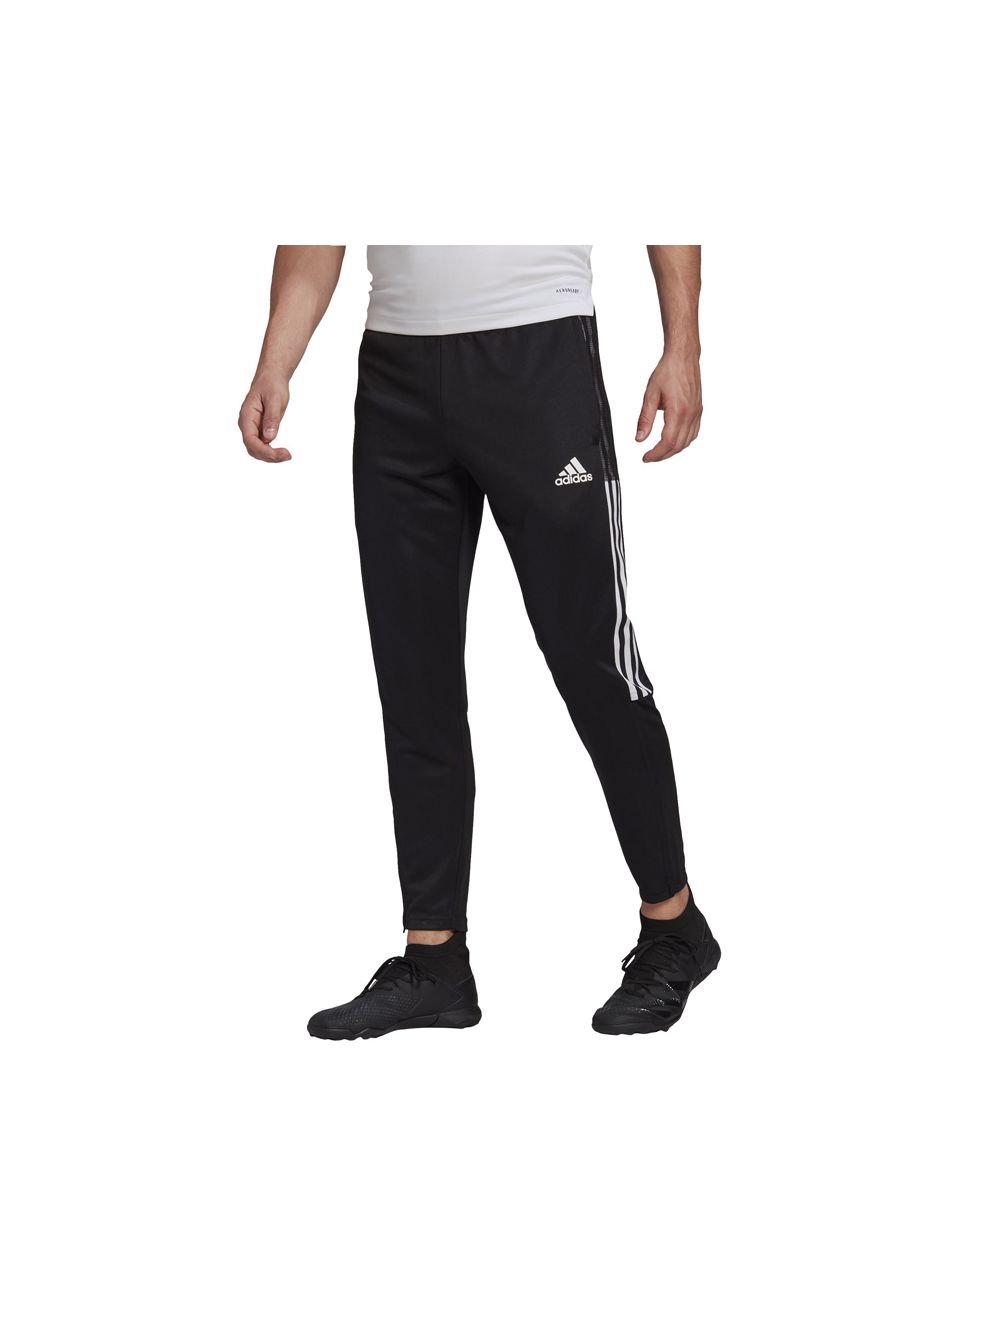 Adidas Primeknit A1 Football Mens Pants (Pads Not Included) | Epic Sports